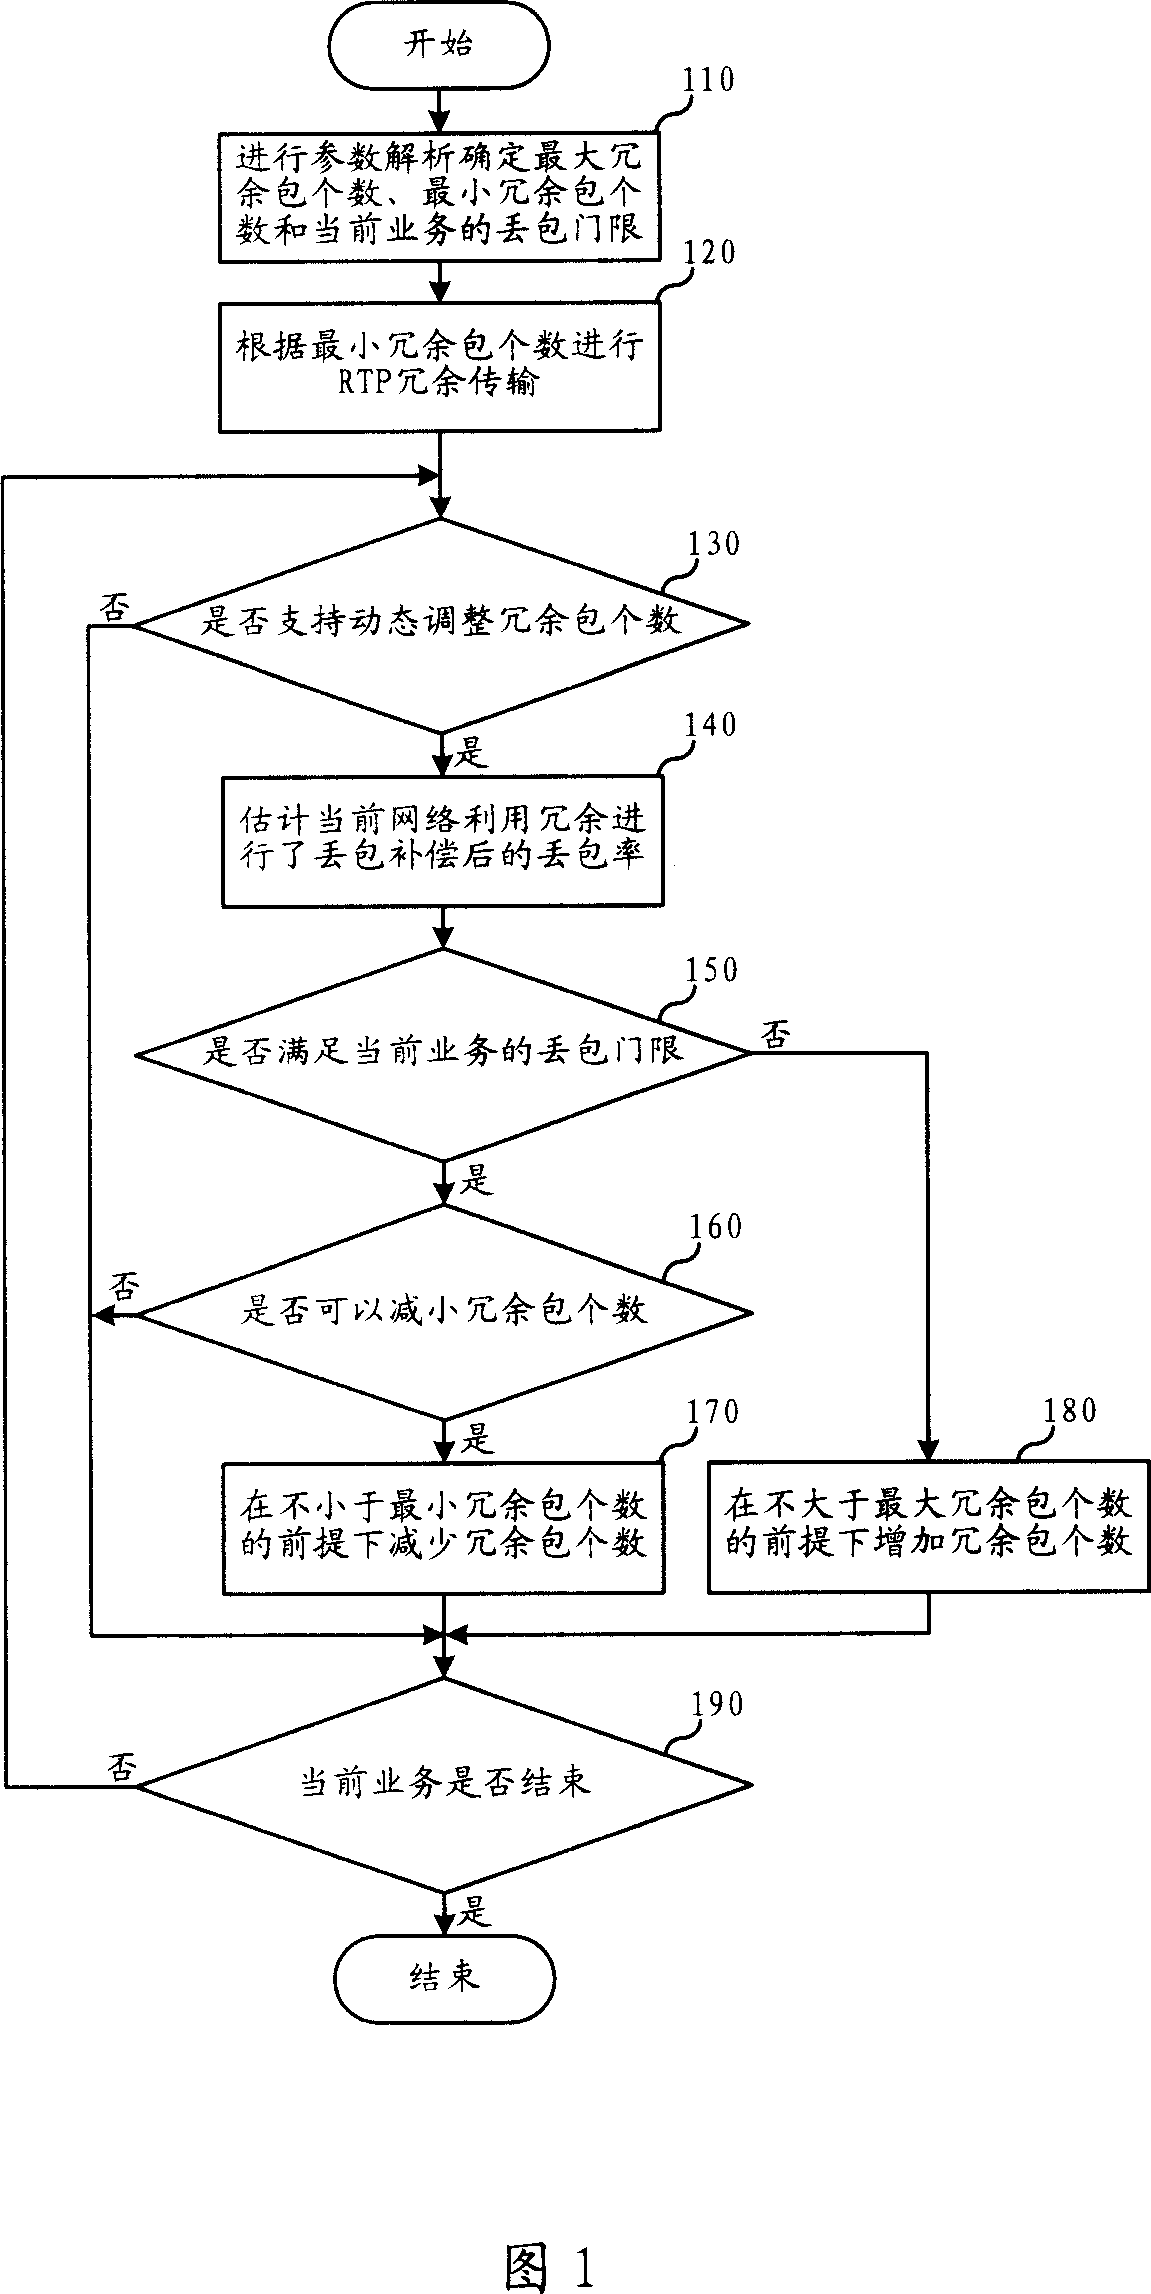 Method and system for realizing realtime transmission protocol message redundancy